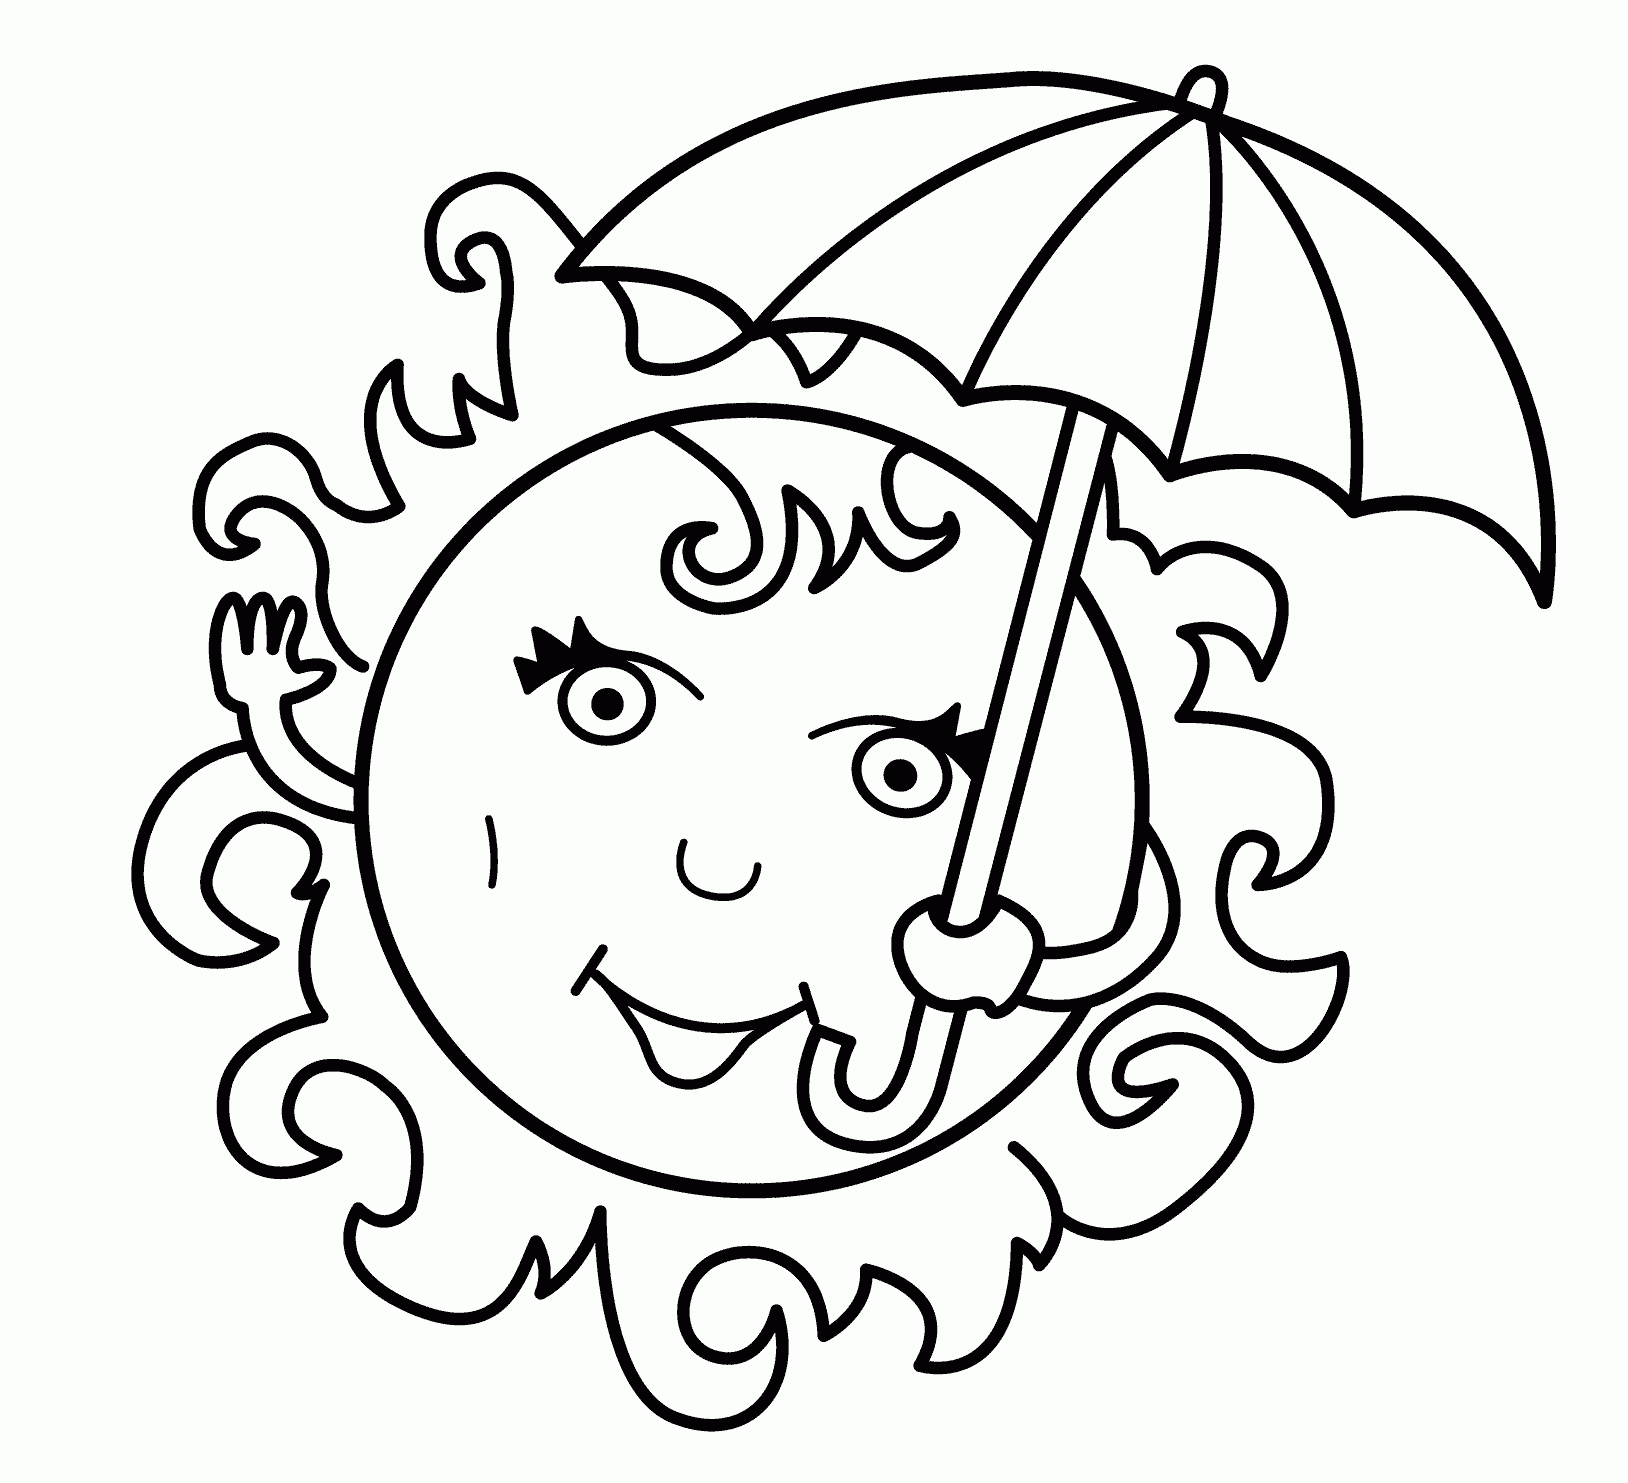 Download Free Printable Summer Coloring Pages For Kids! - Free Printable Summer Coloring Pages